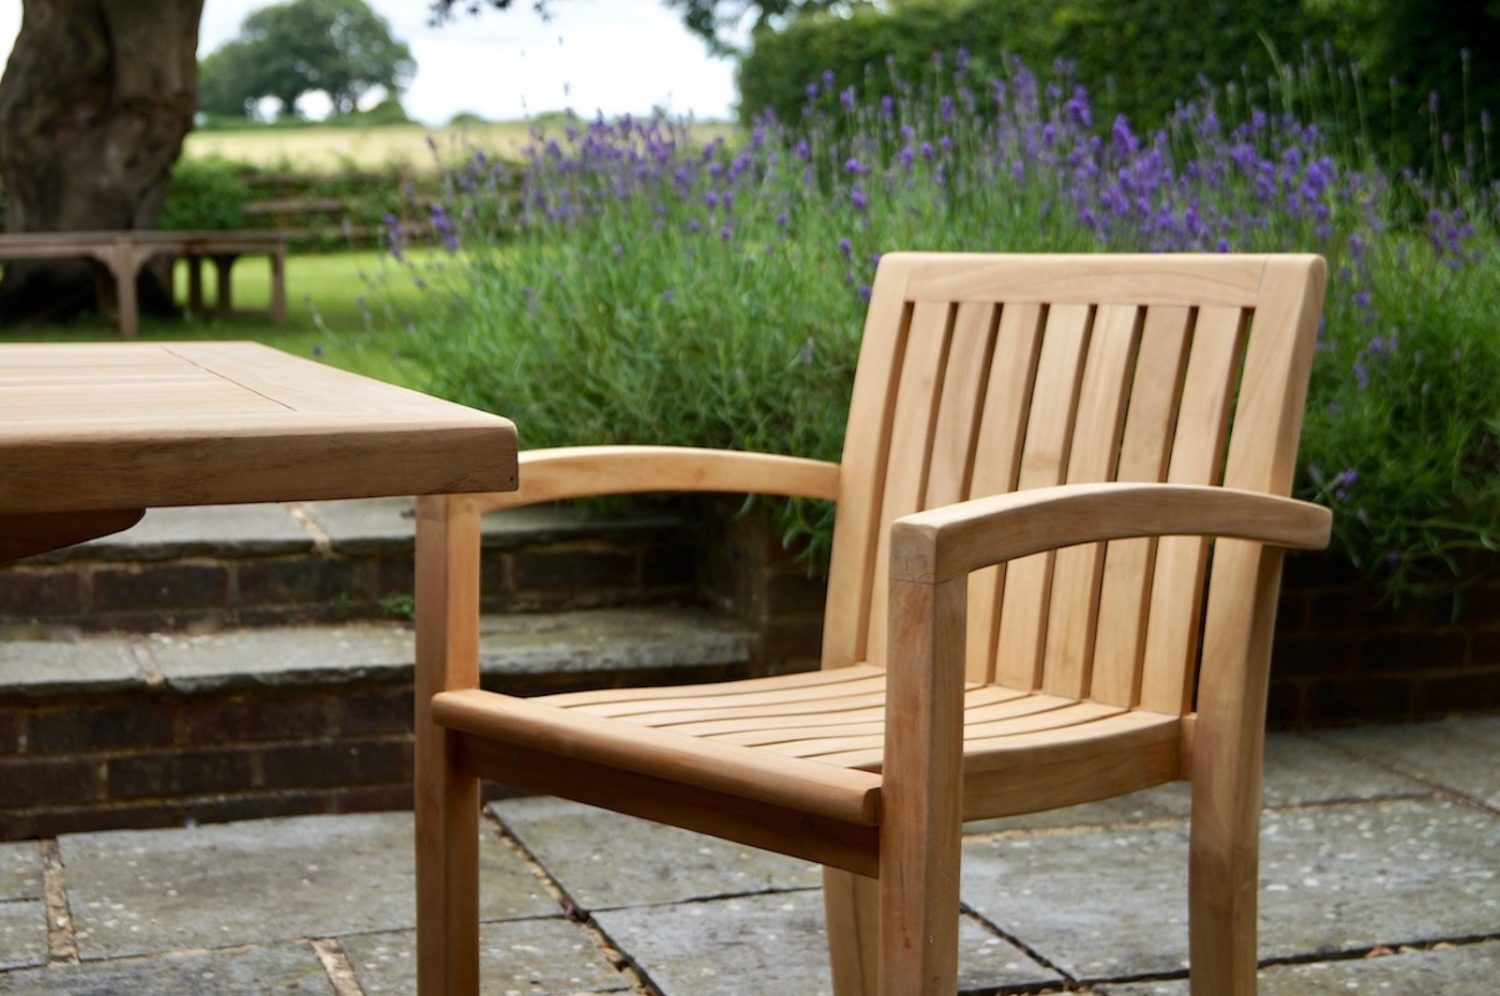 quality-wooden-garden-chairs-makemesomethingspecial.com